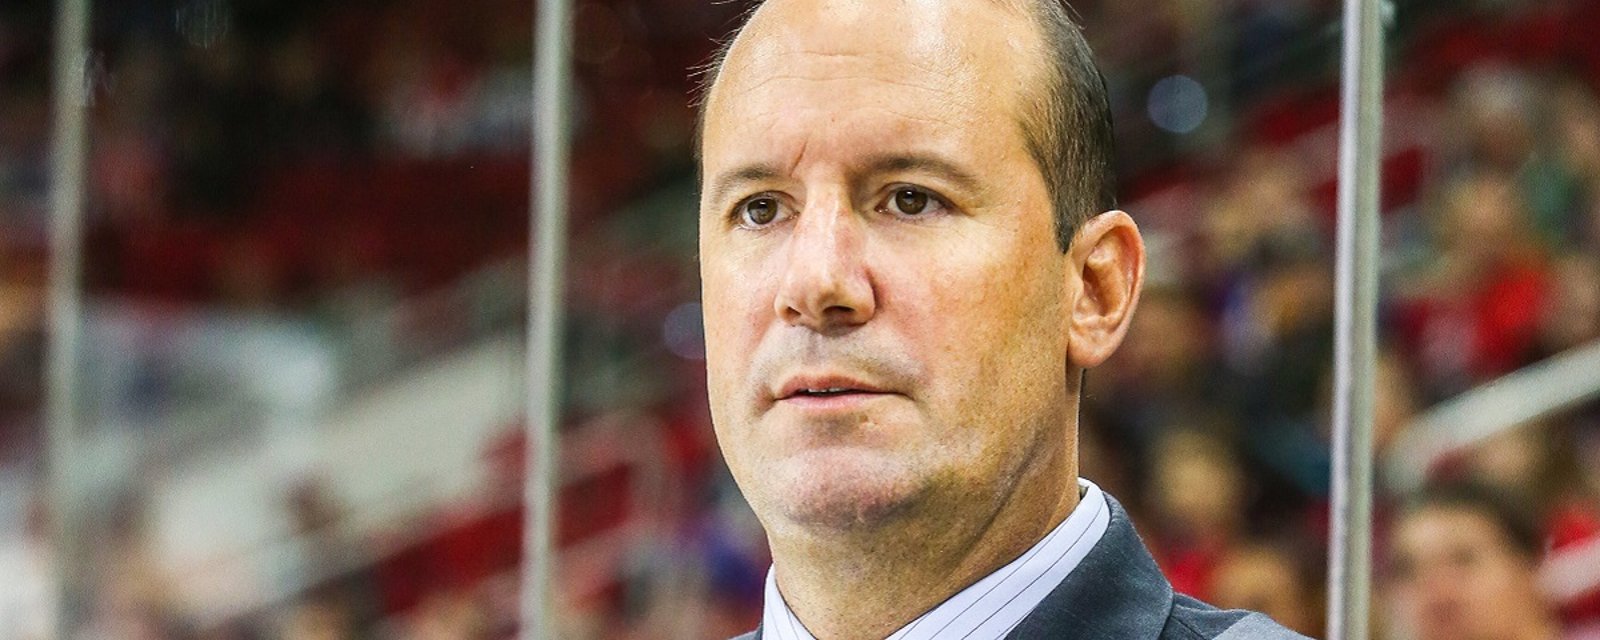 Breaking: Capitals have fired their head coach.